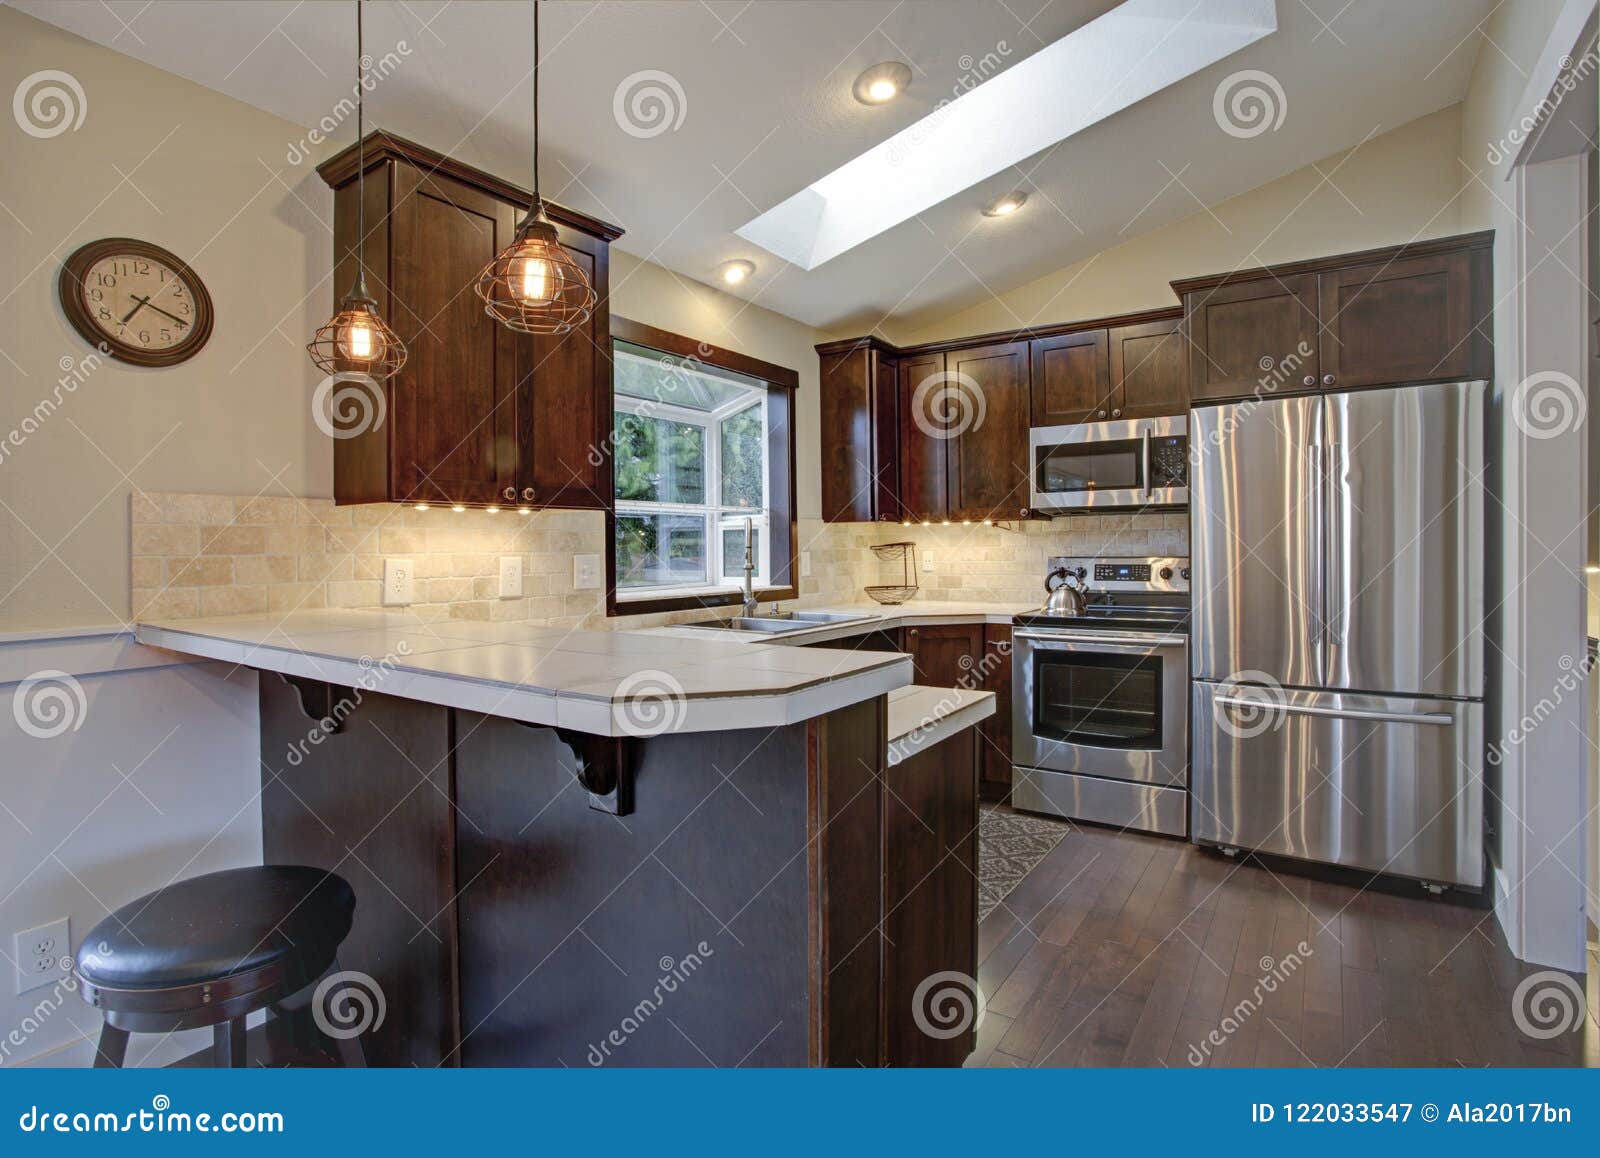 remodeled kitchen with skylights.